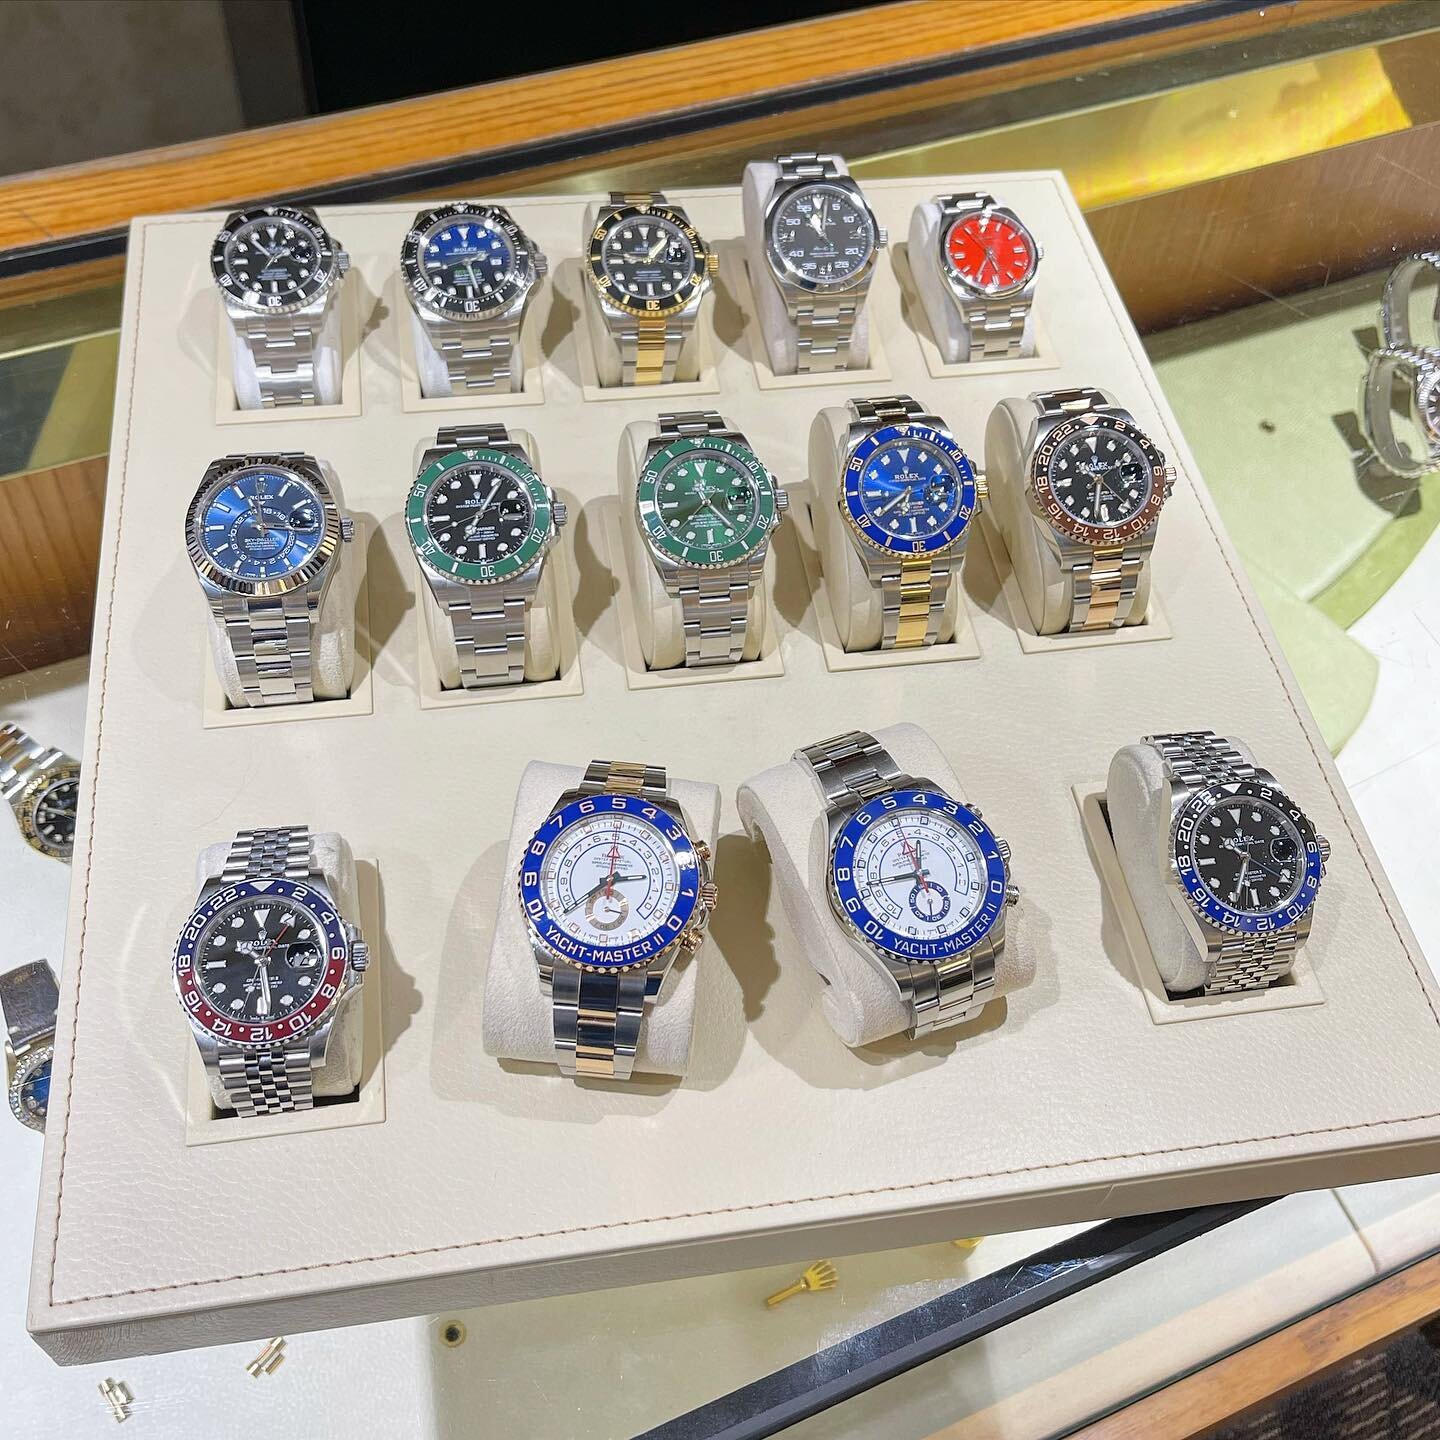 😍 Which would you choose⁉️ Come shop with us!
.
.
.
#PhilipsonsJewelry #WatchWeb #rolex #dailywatch #wis #watchfam #rolexaholics #wruw #watchgeek #rolexpepsi #watchlove #jamescameron #horology #126710 #126610 #watchnerd #skydweller #toolwatch #reloj